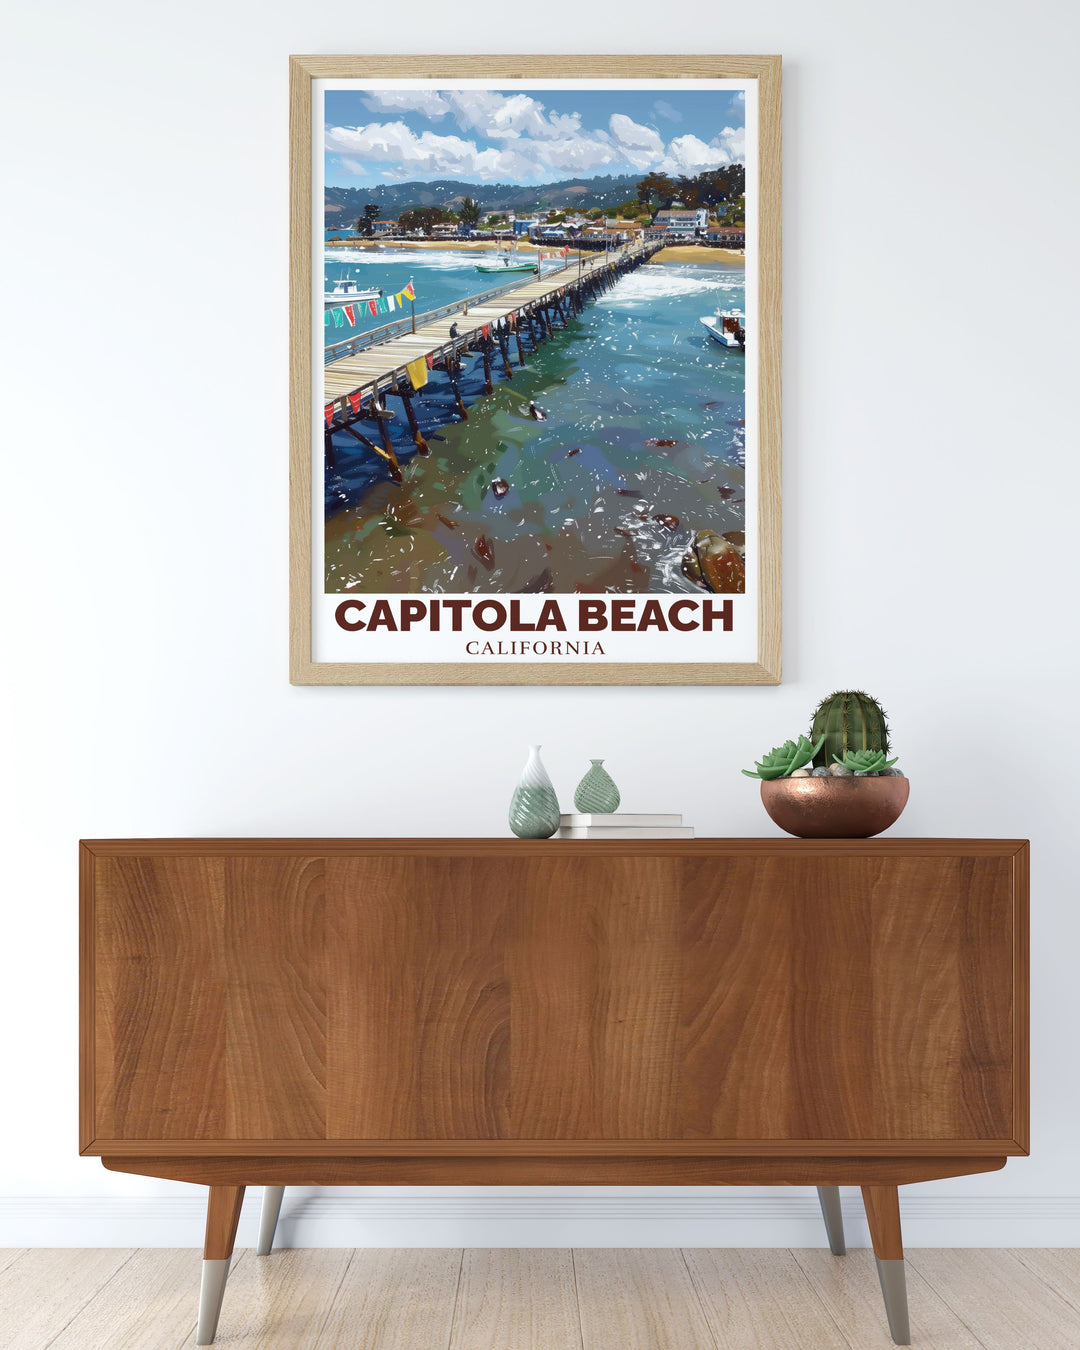 Stunning Capitola Wharf Art featuring detailed artwork that highlights the Wharfs charm and allure a must have for beach lovers and anyone who dreams of experiencing the scenic beauty of Californias coastal gems